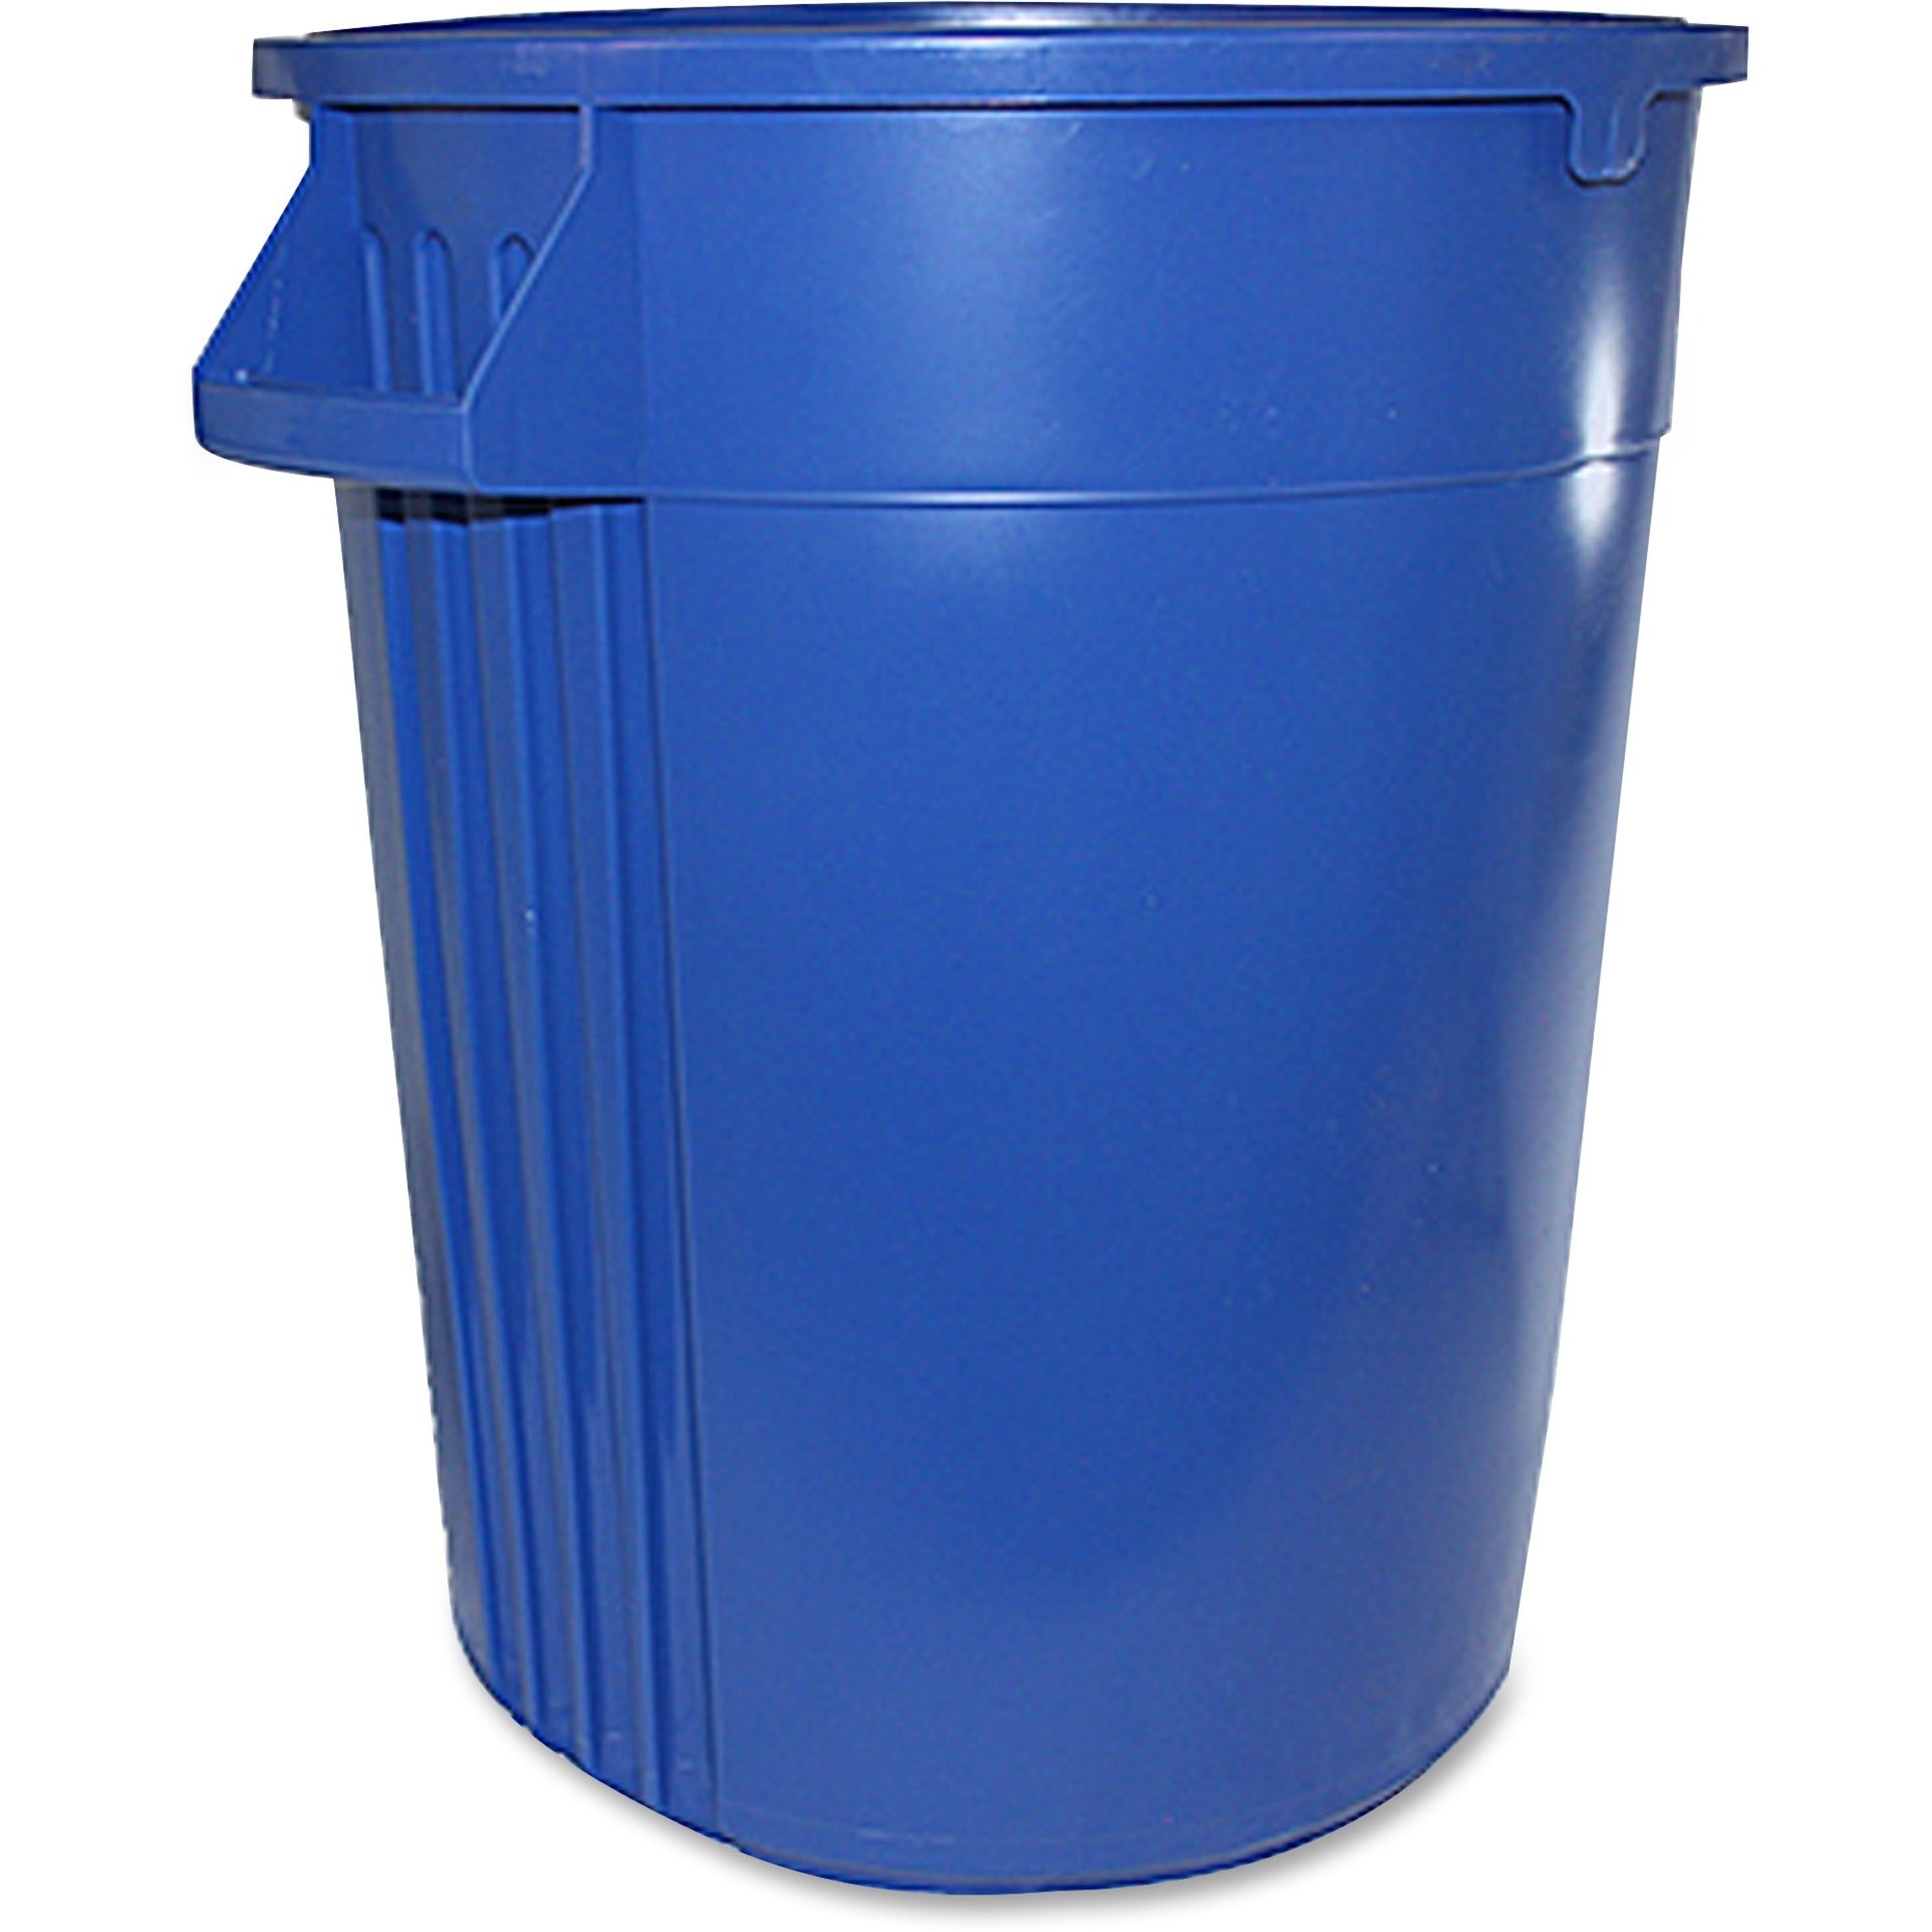 Gator 44-gallon Container - Lockable - 44 gal Capacity - Crush Resistant, Impact Resistant, Spill Resistant, Handle - 31.6" Height x 23.8" Width - Polyethylene Resin, Plastic - Blue - 1 Each - 